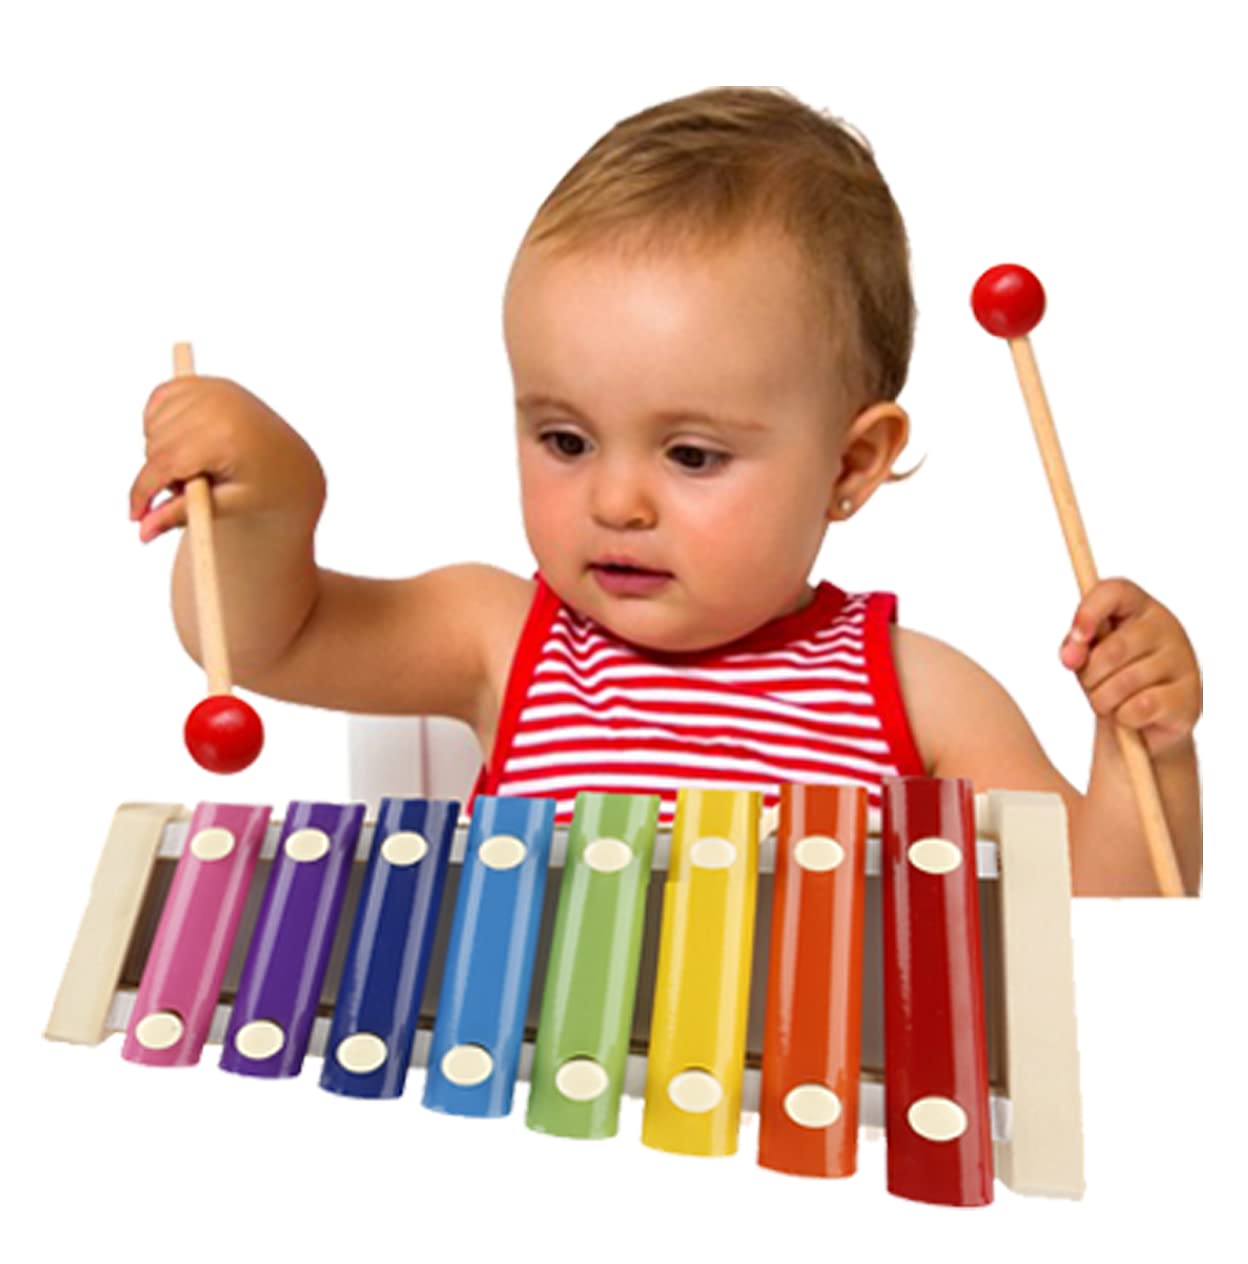 Ecofriendly Wooden Xylophone Kids First Musical Sound Instrument Toys 8 Note (Pack of 1)